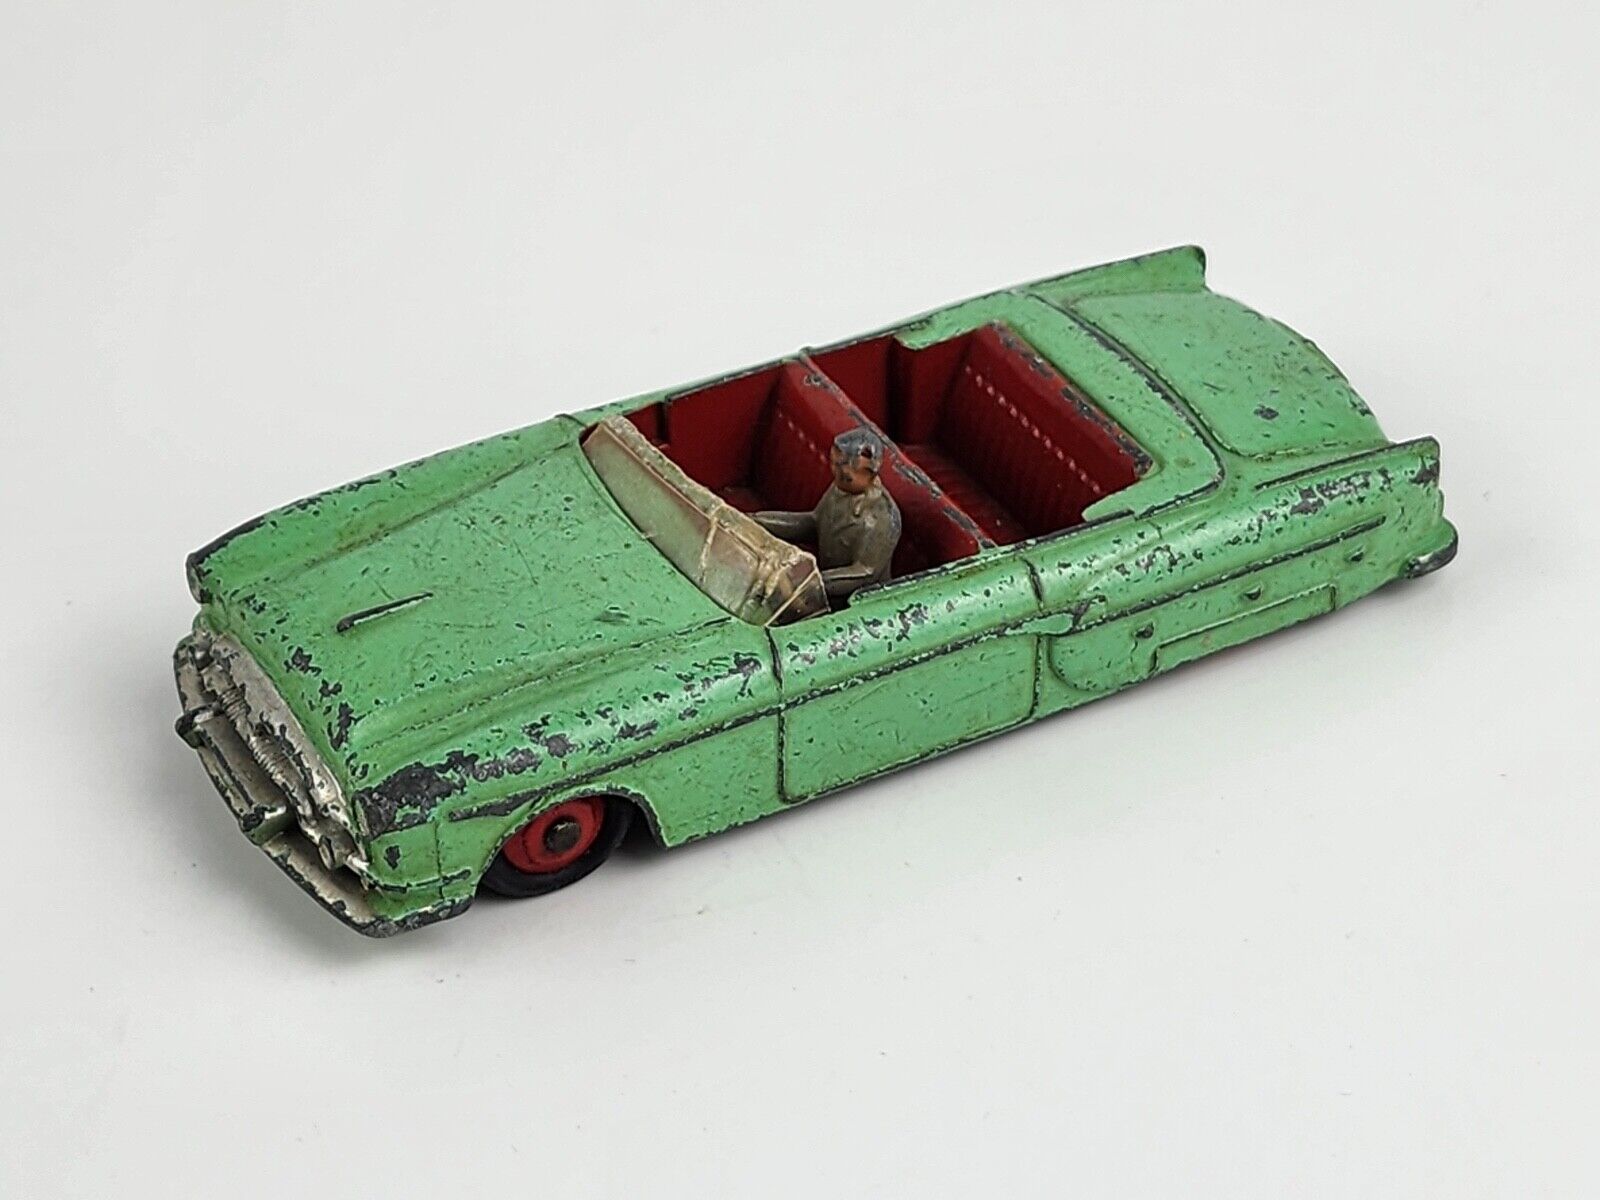 Primary image for Vintage Dinky Toys England 132 Package Green Convertible Die cast car w/ driver